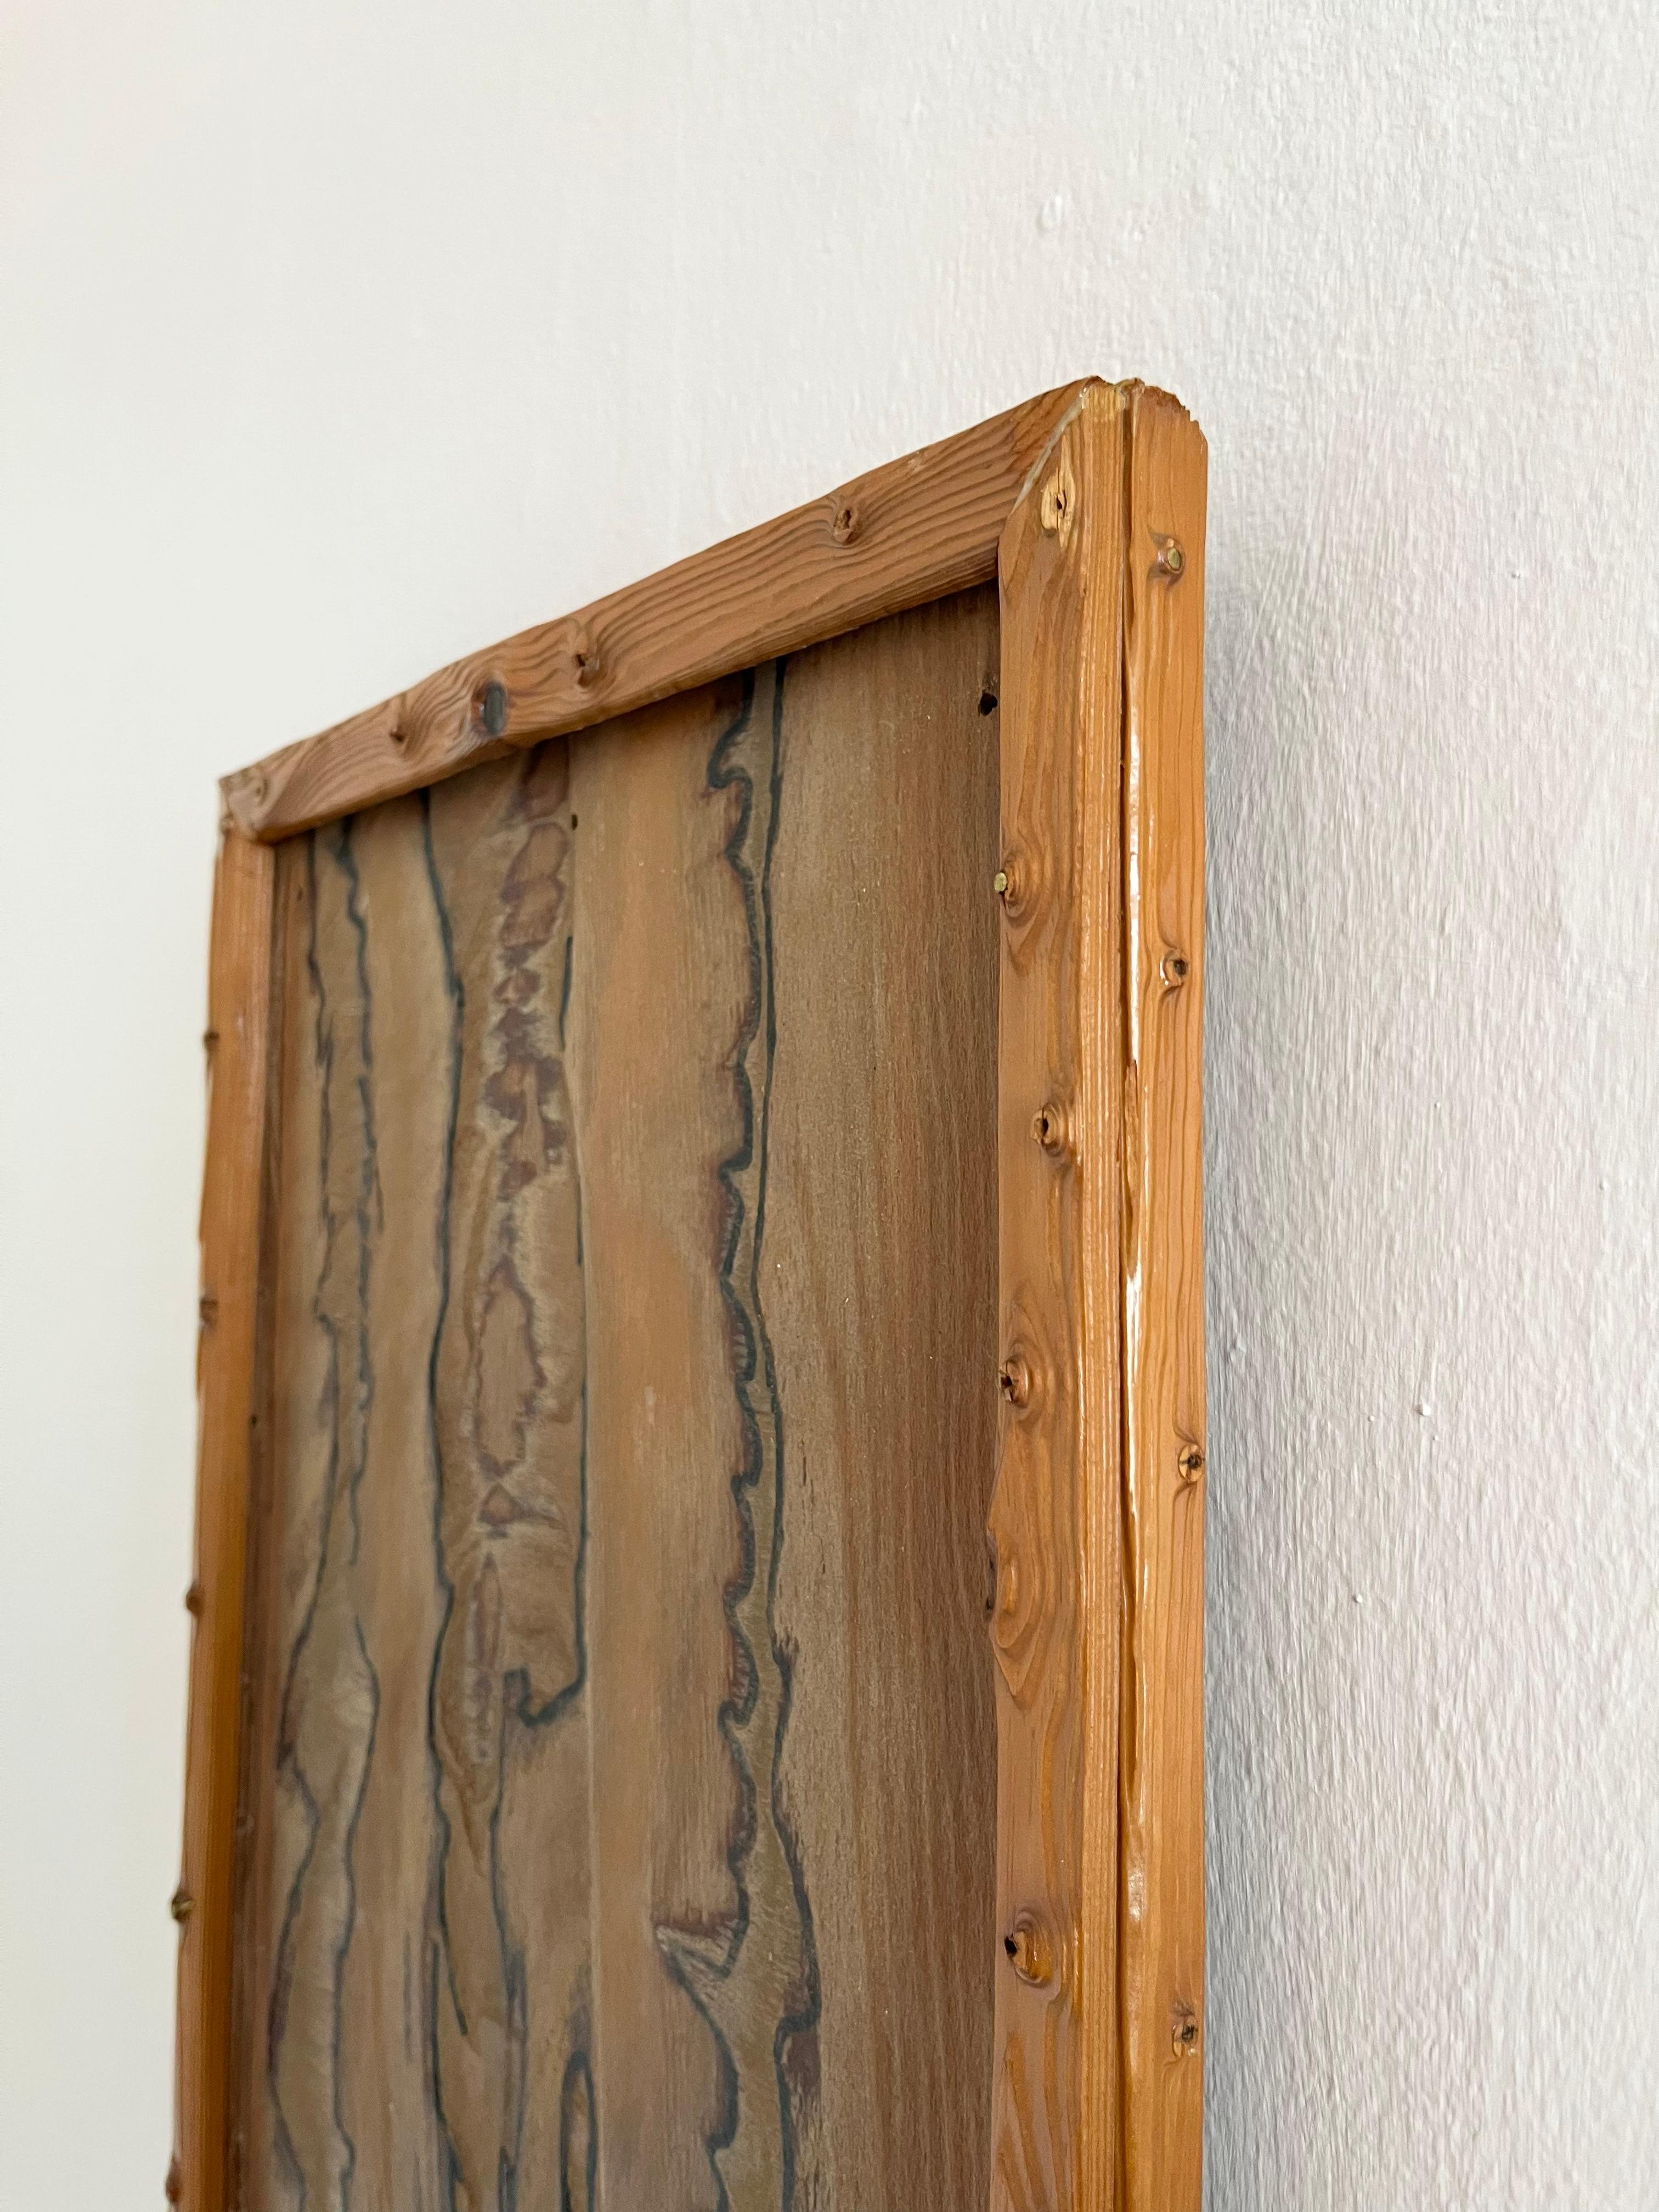 Framed plywood wall decoration 1970s craftmanship In Good Condition For Sale In Frederiksberg C, DK